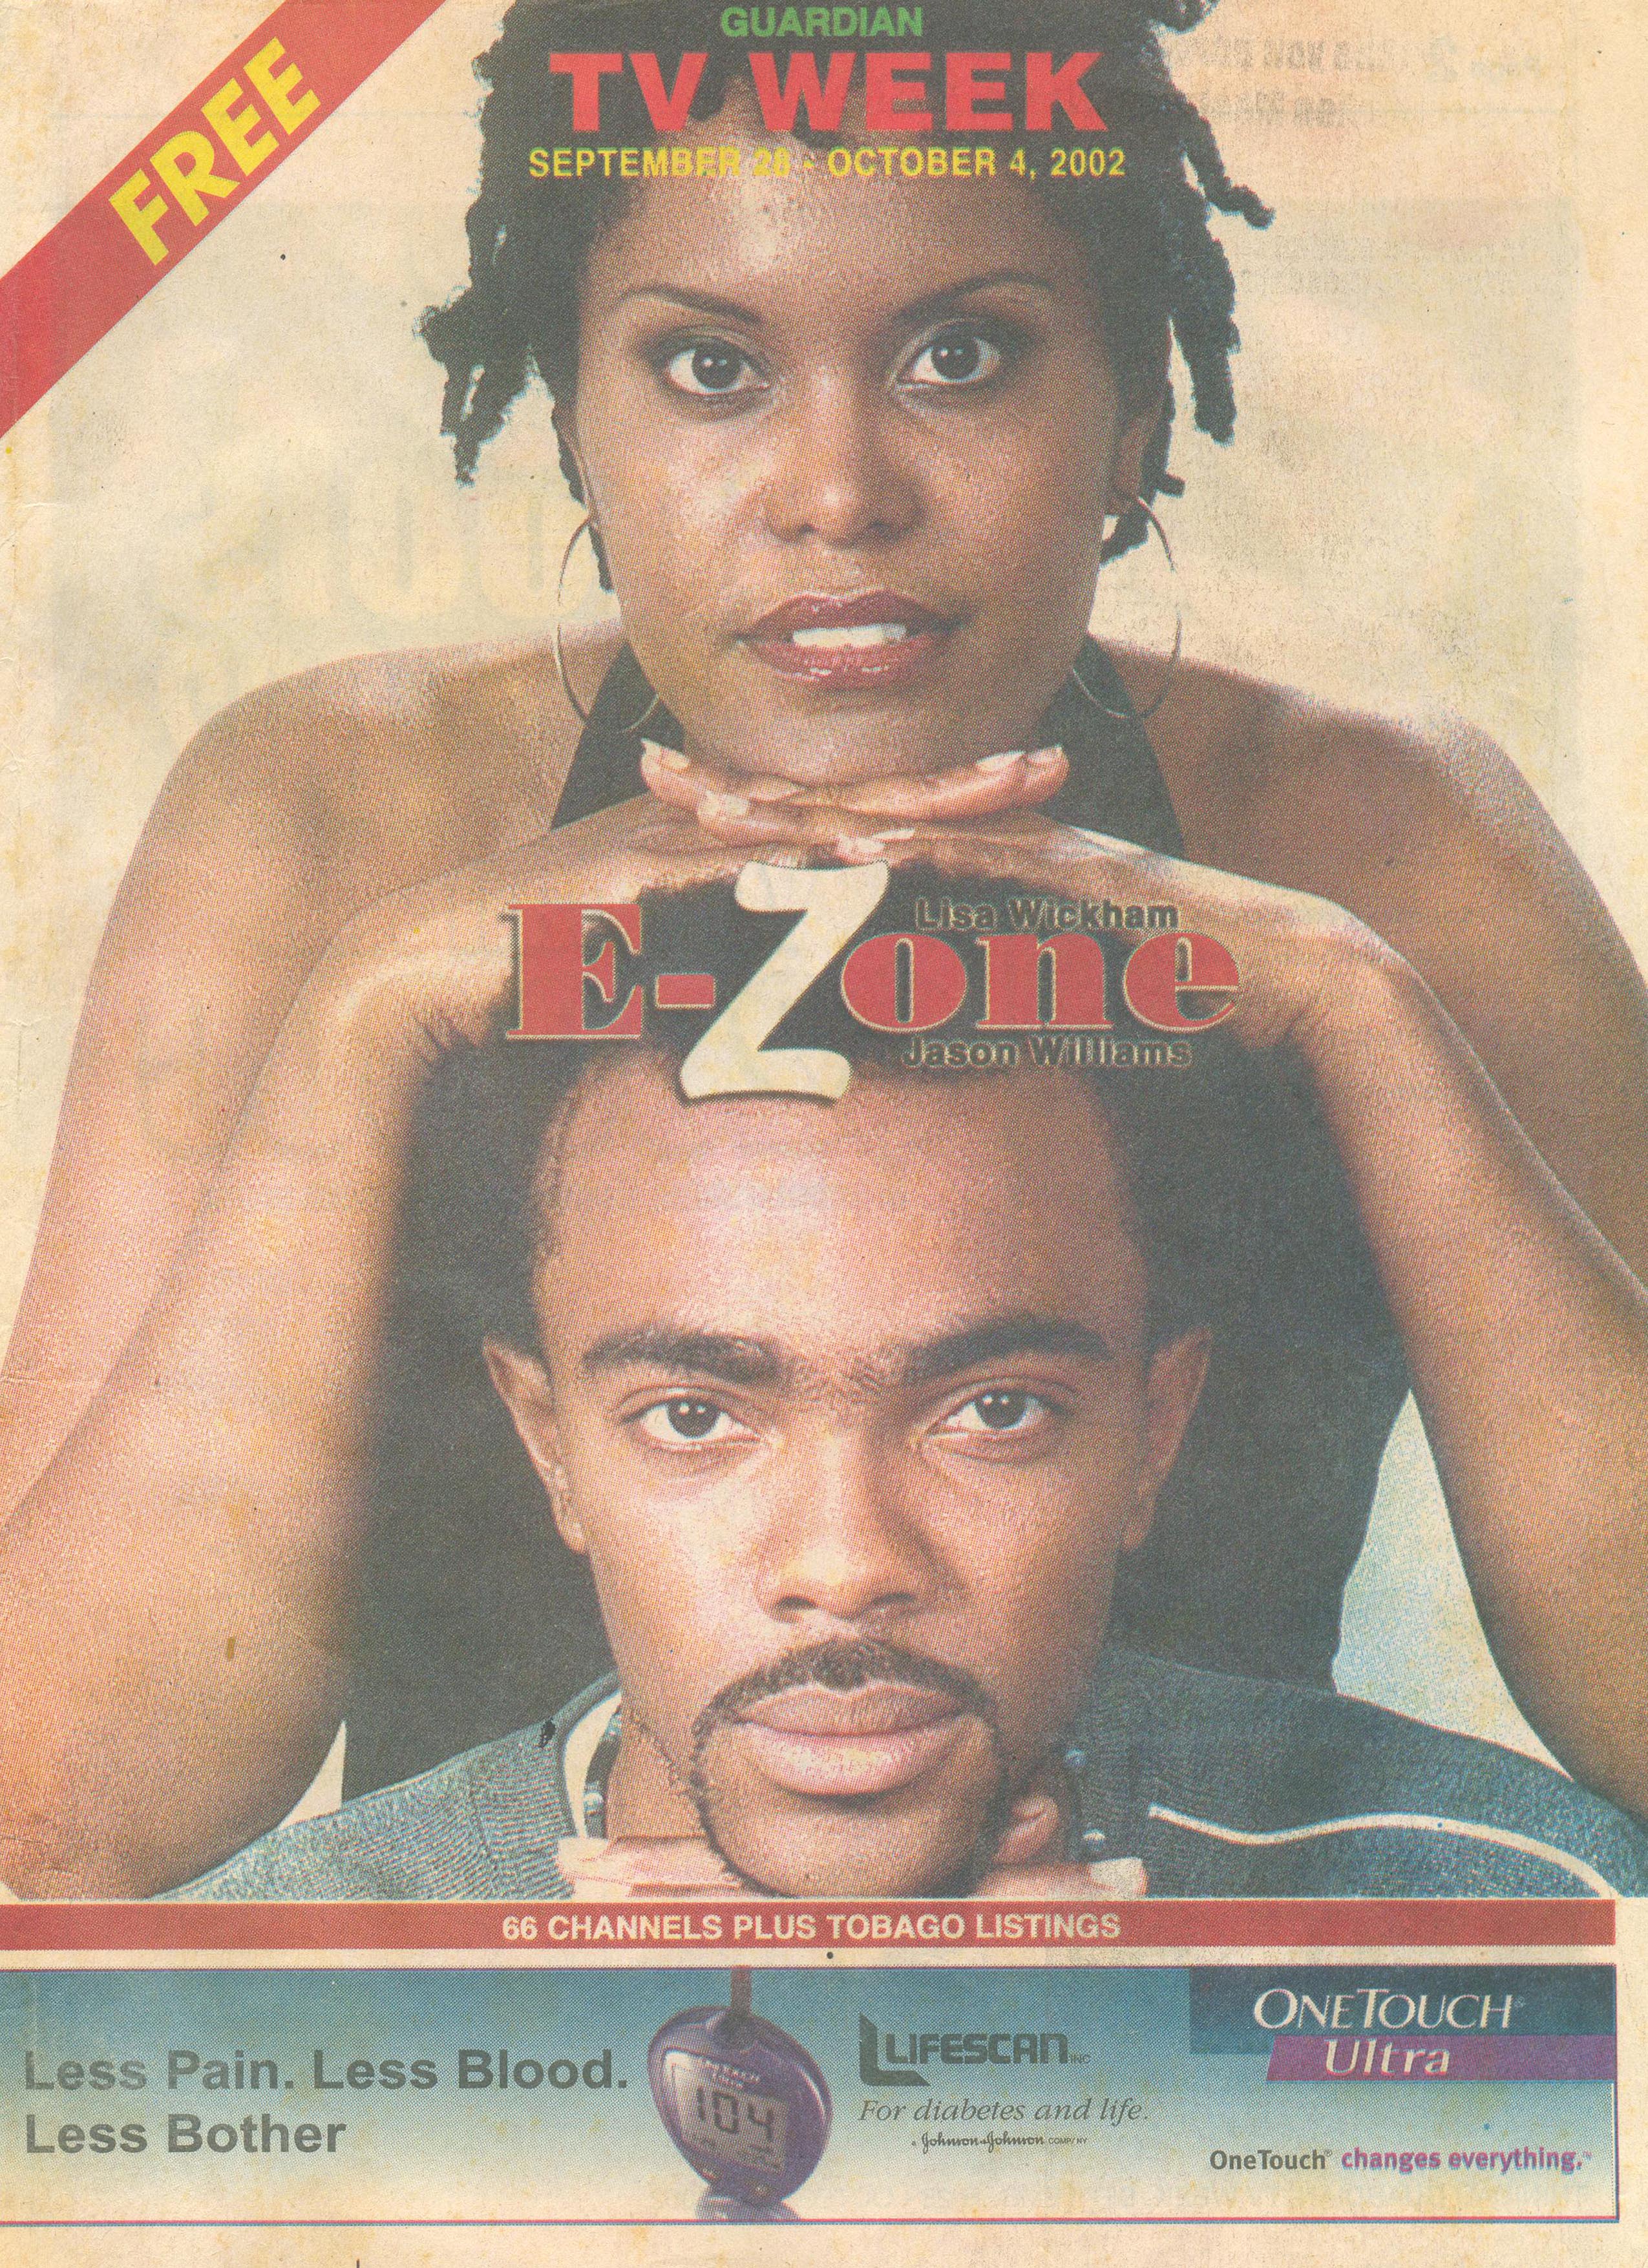 Lisa Wickham and Jason Williams on the Cover of the Trinidad Guardian Newspaper, TV Guide